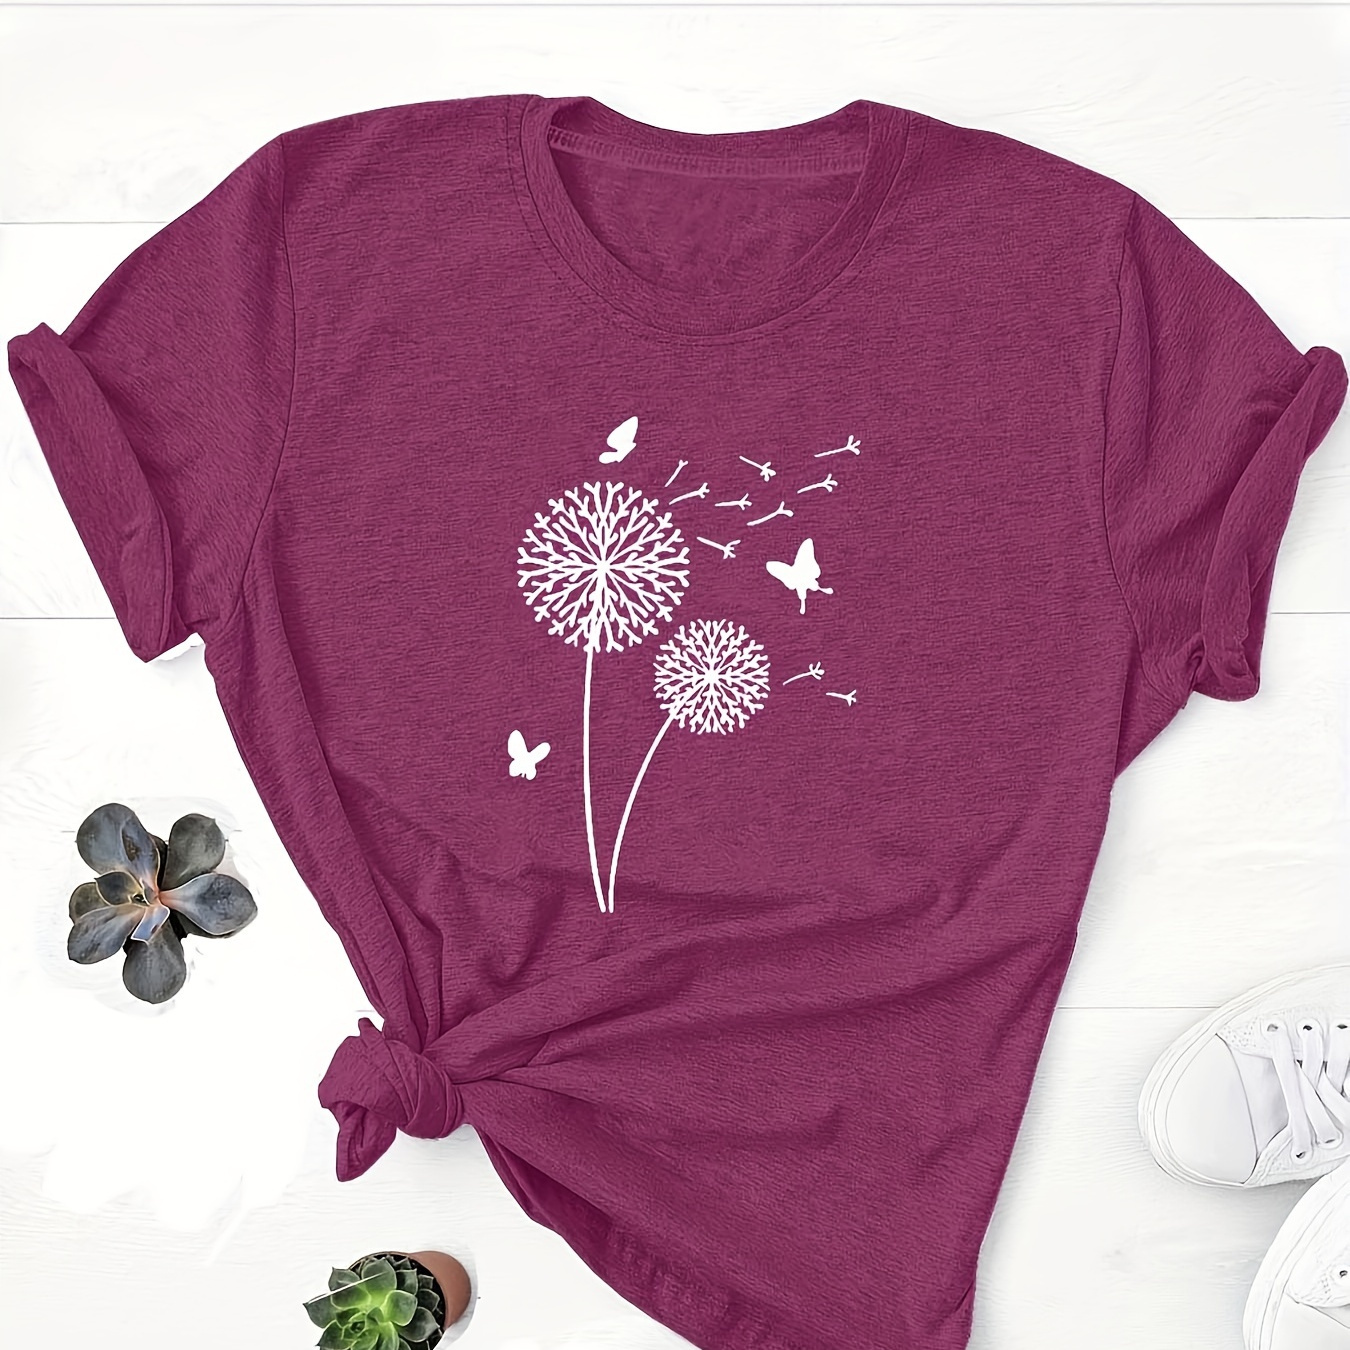 

Dandelion & Butterfly Print Crew Neck T-shirt, Casual Short Sleeve T-shirt For Spring & Summer, Women's Clothing